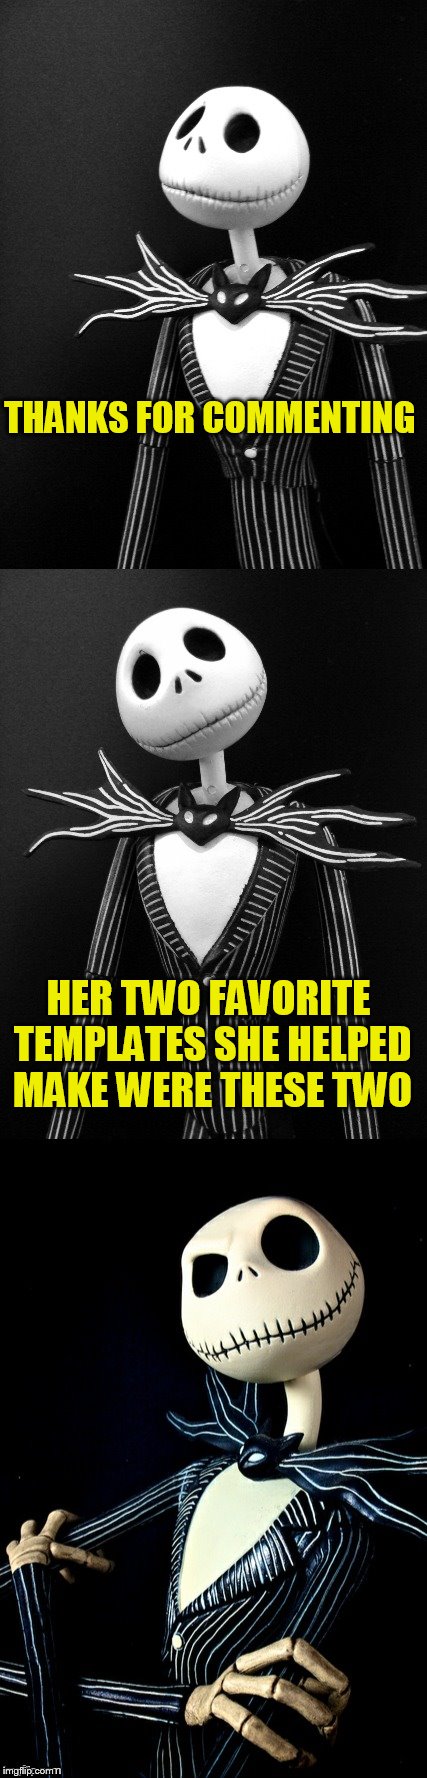 Jack Puns | THANKS FOR COMMENTING HER TWO FAVORITE TEMPLATES SHE HELPED MAKE WERE THESE TWO | image tagged in jack puns | made w/ Imgflip meme maker